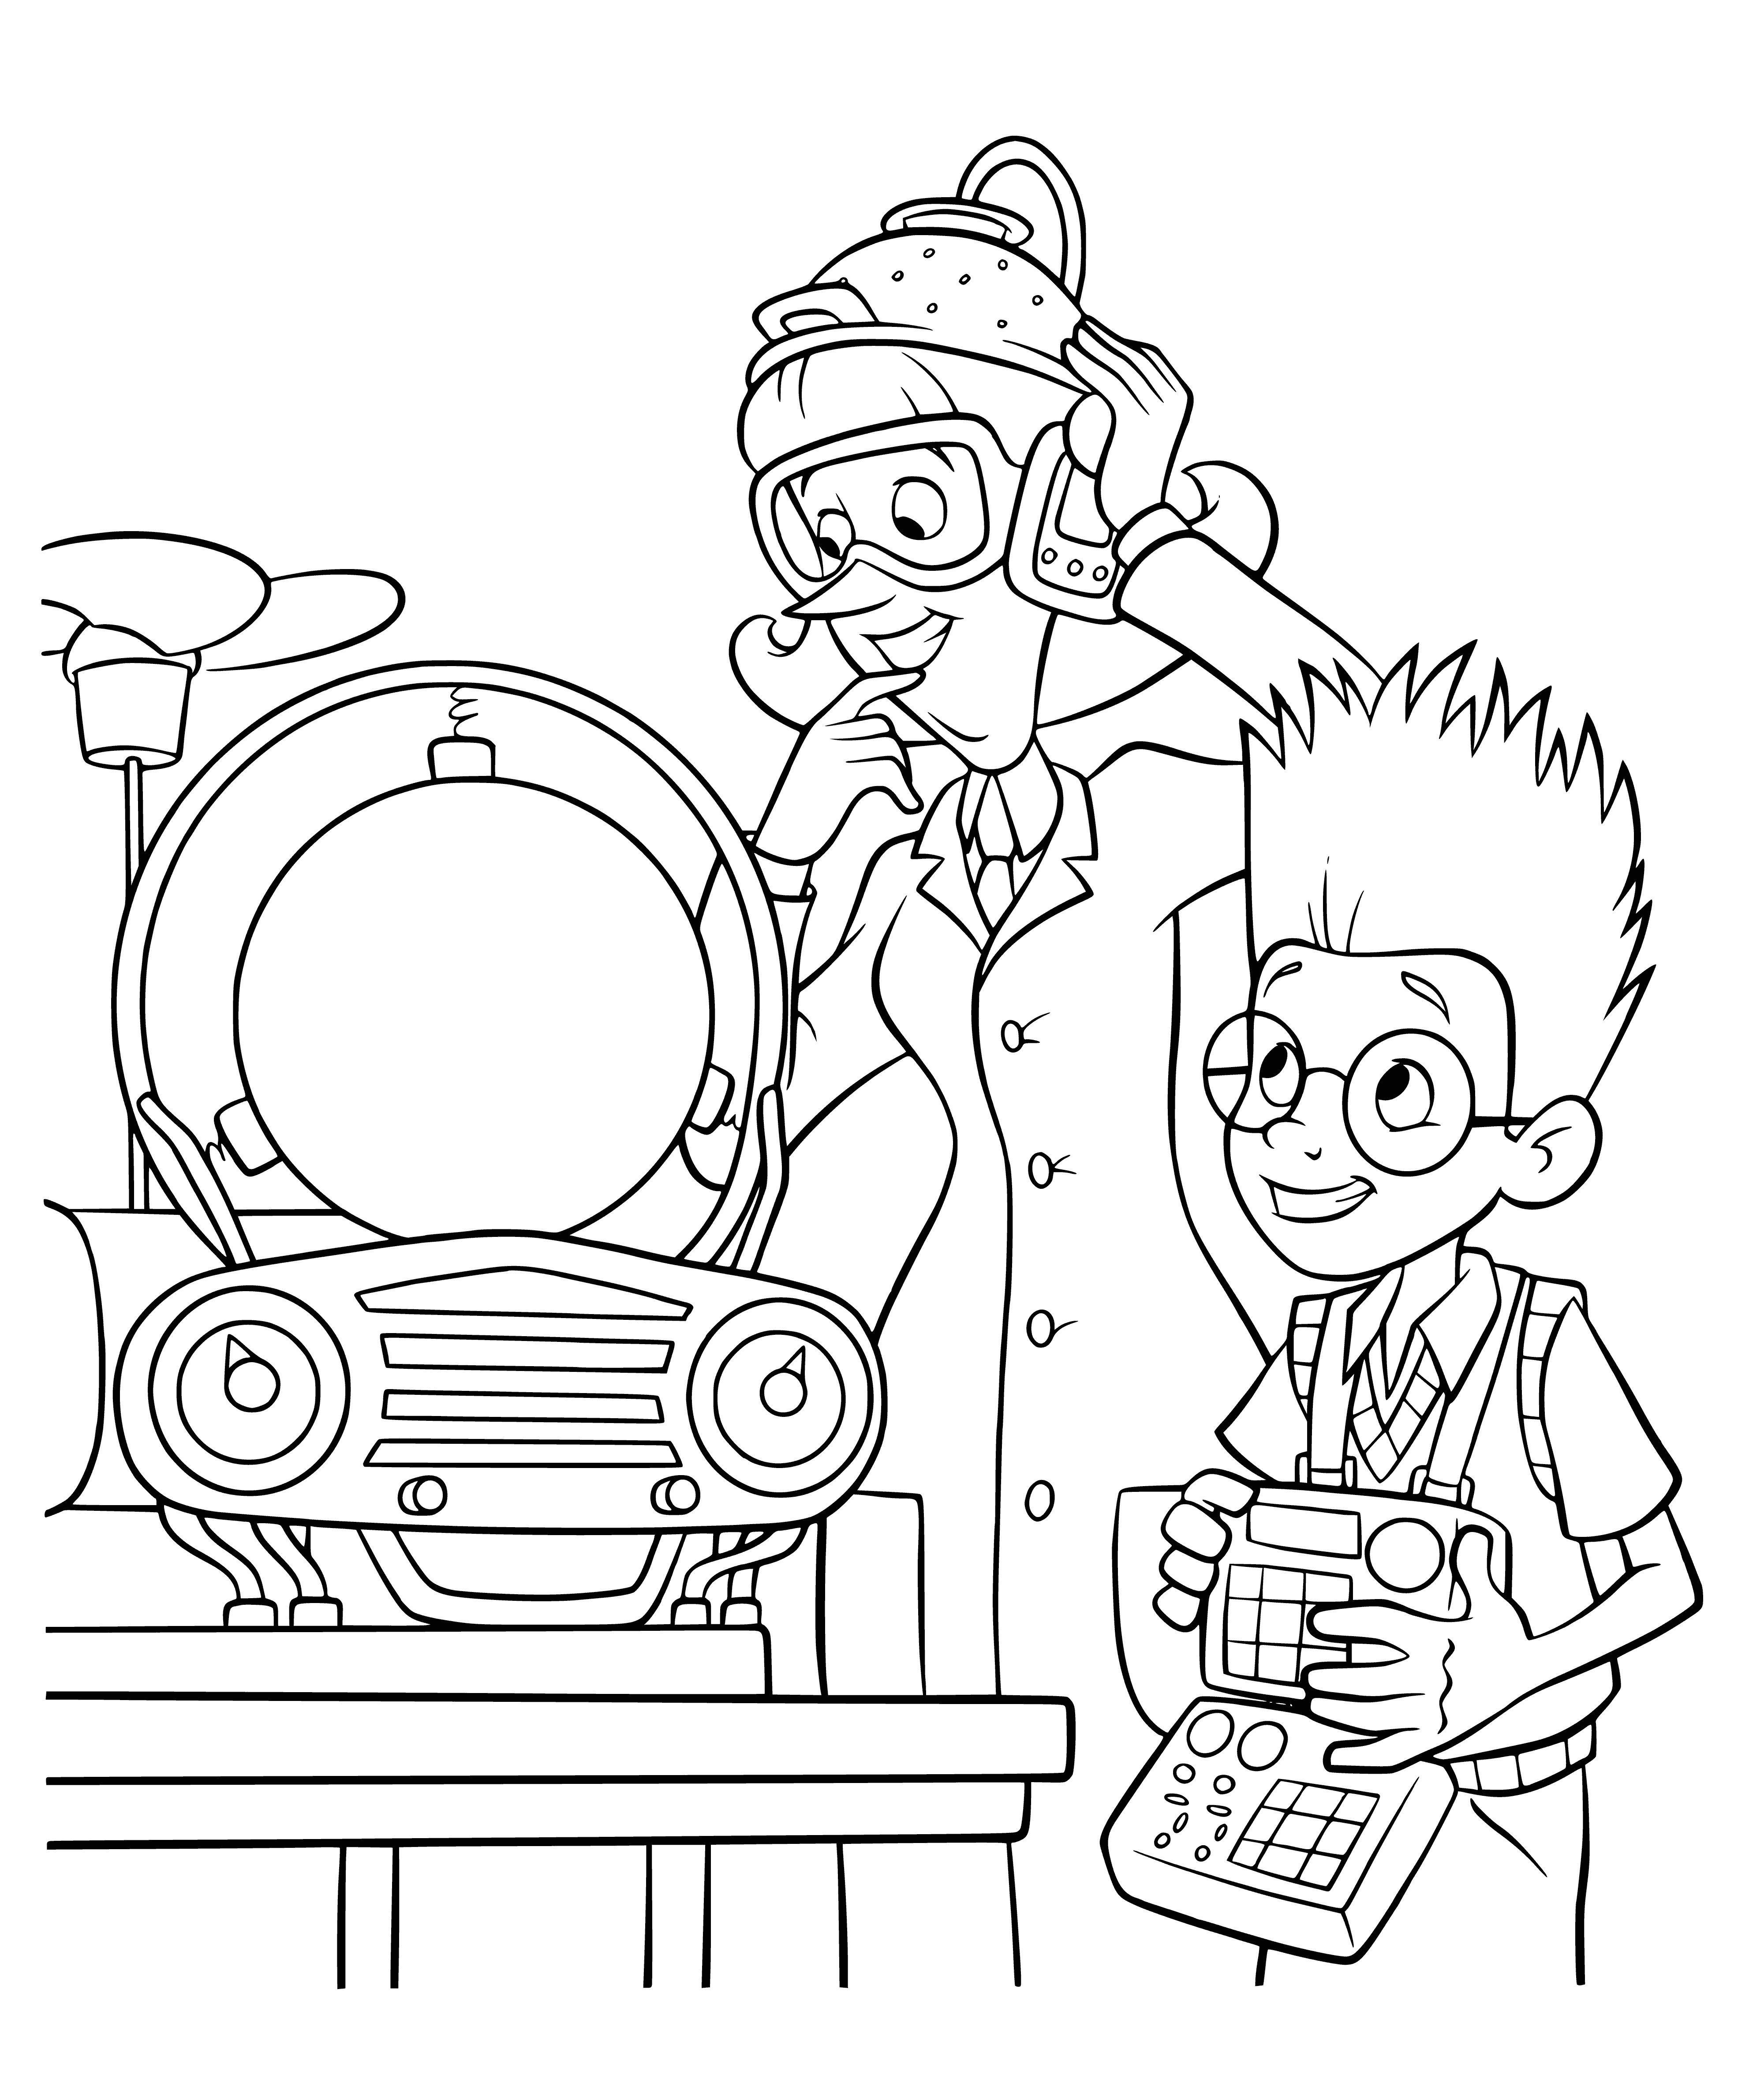 coloring page: A large yellow machine has a black handle on left & blue button on right. On front, a small green light & sign says "Memory Shaper".